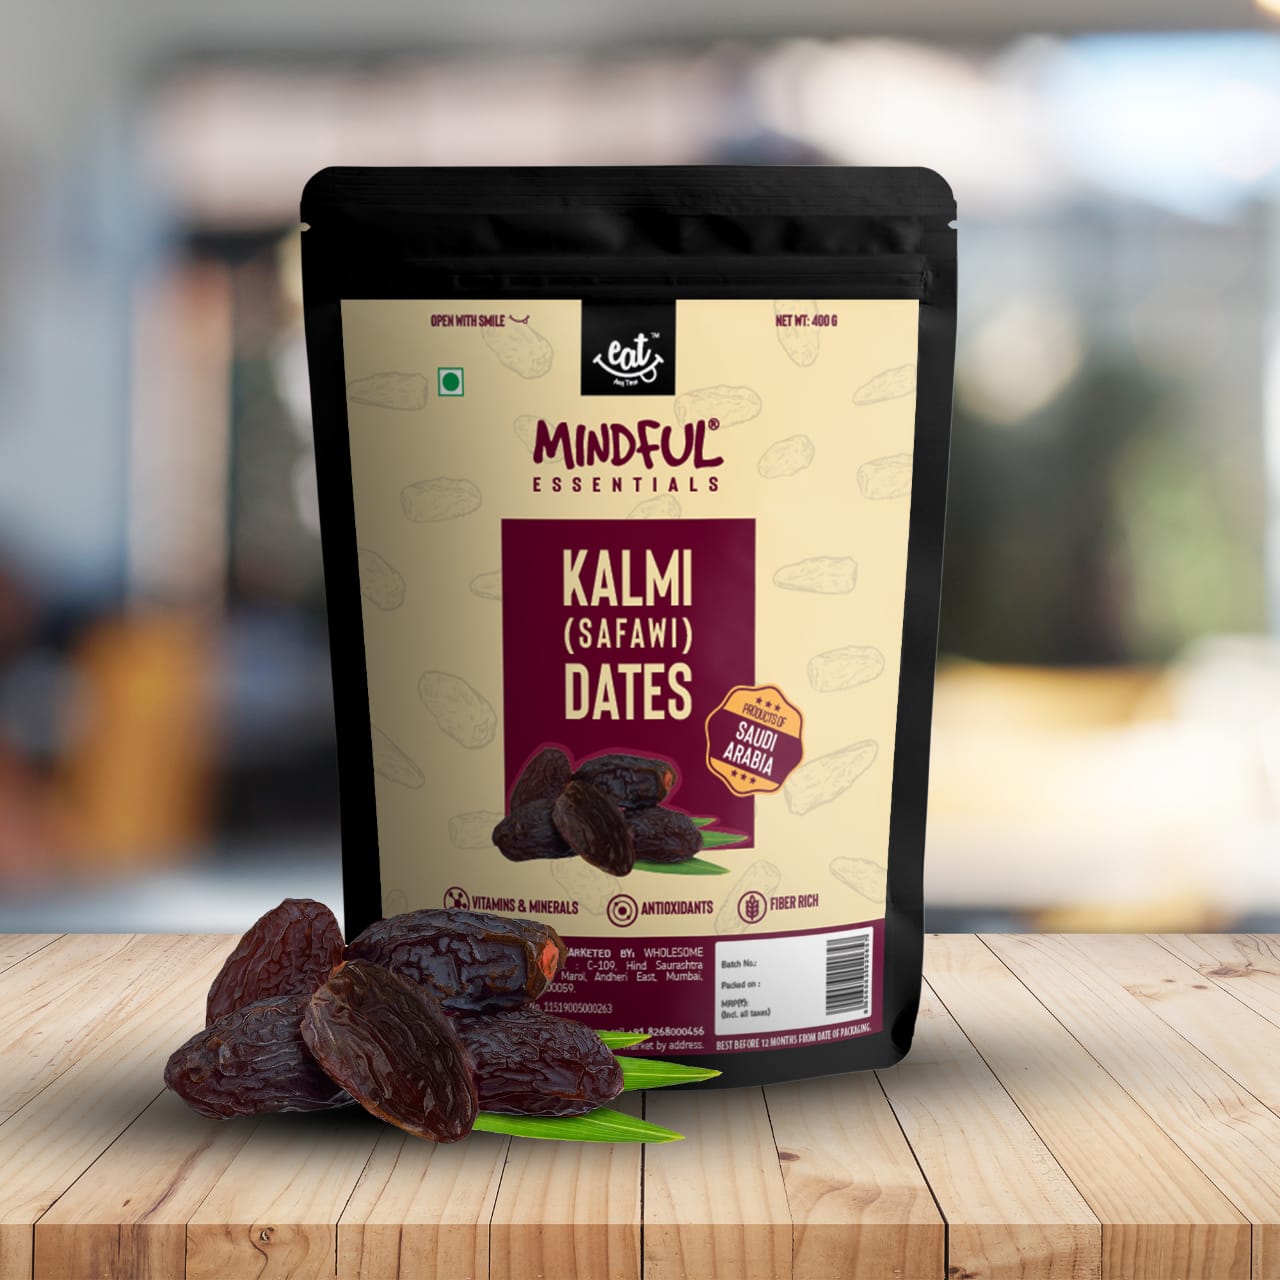 Kalmi Safawi Dates by Eat Anytime. Buy the Best Quality, Shop Online